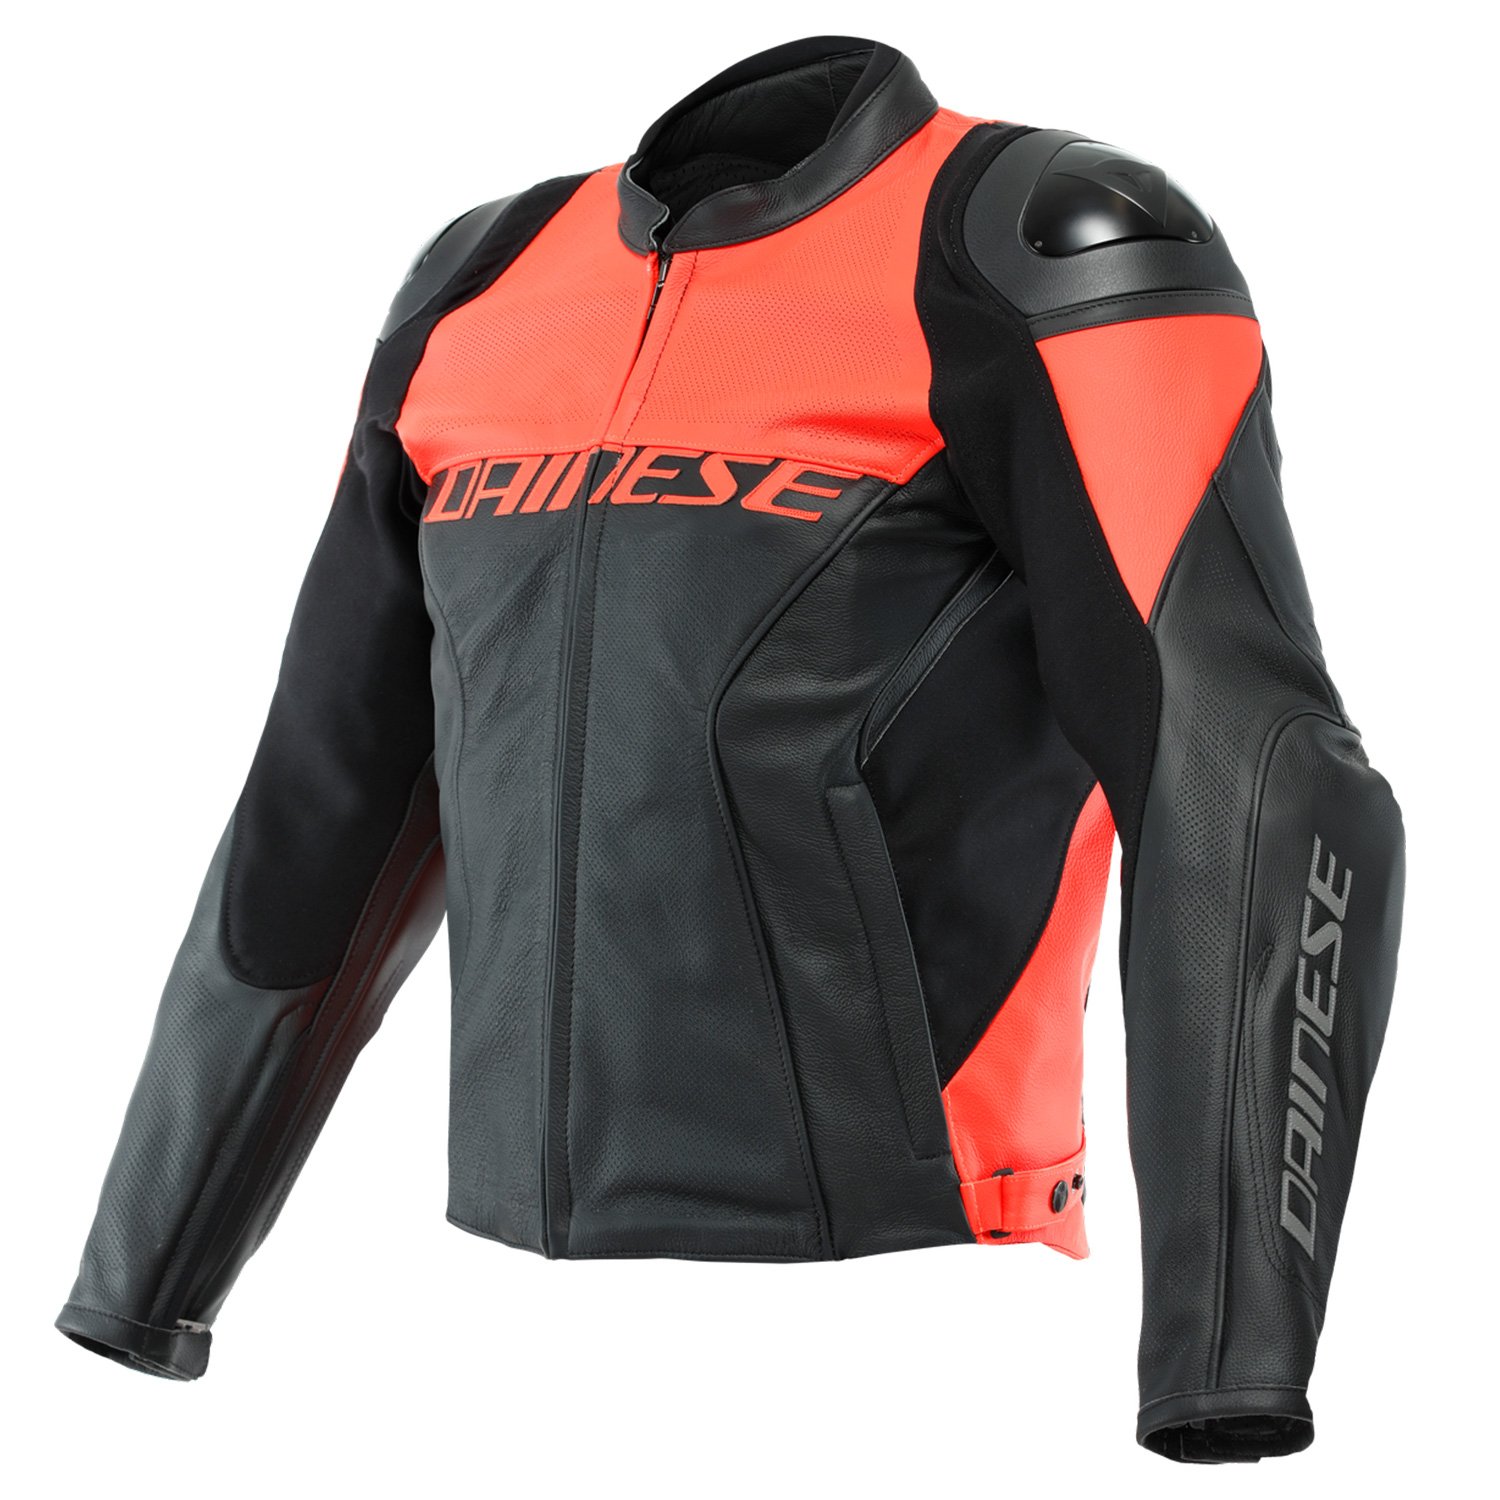 Image of Dainese Racing 4 Perforated Leather Schwarz Fluo Rot Jacke Größe 46